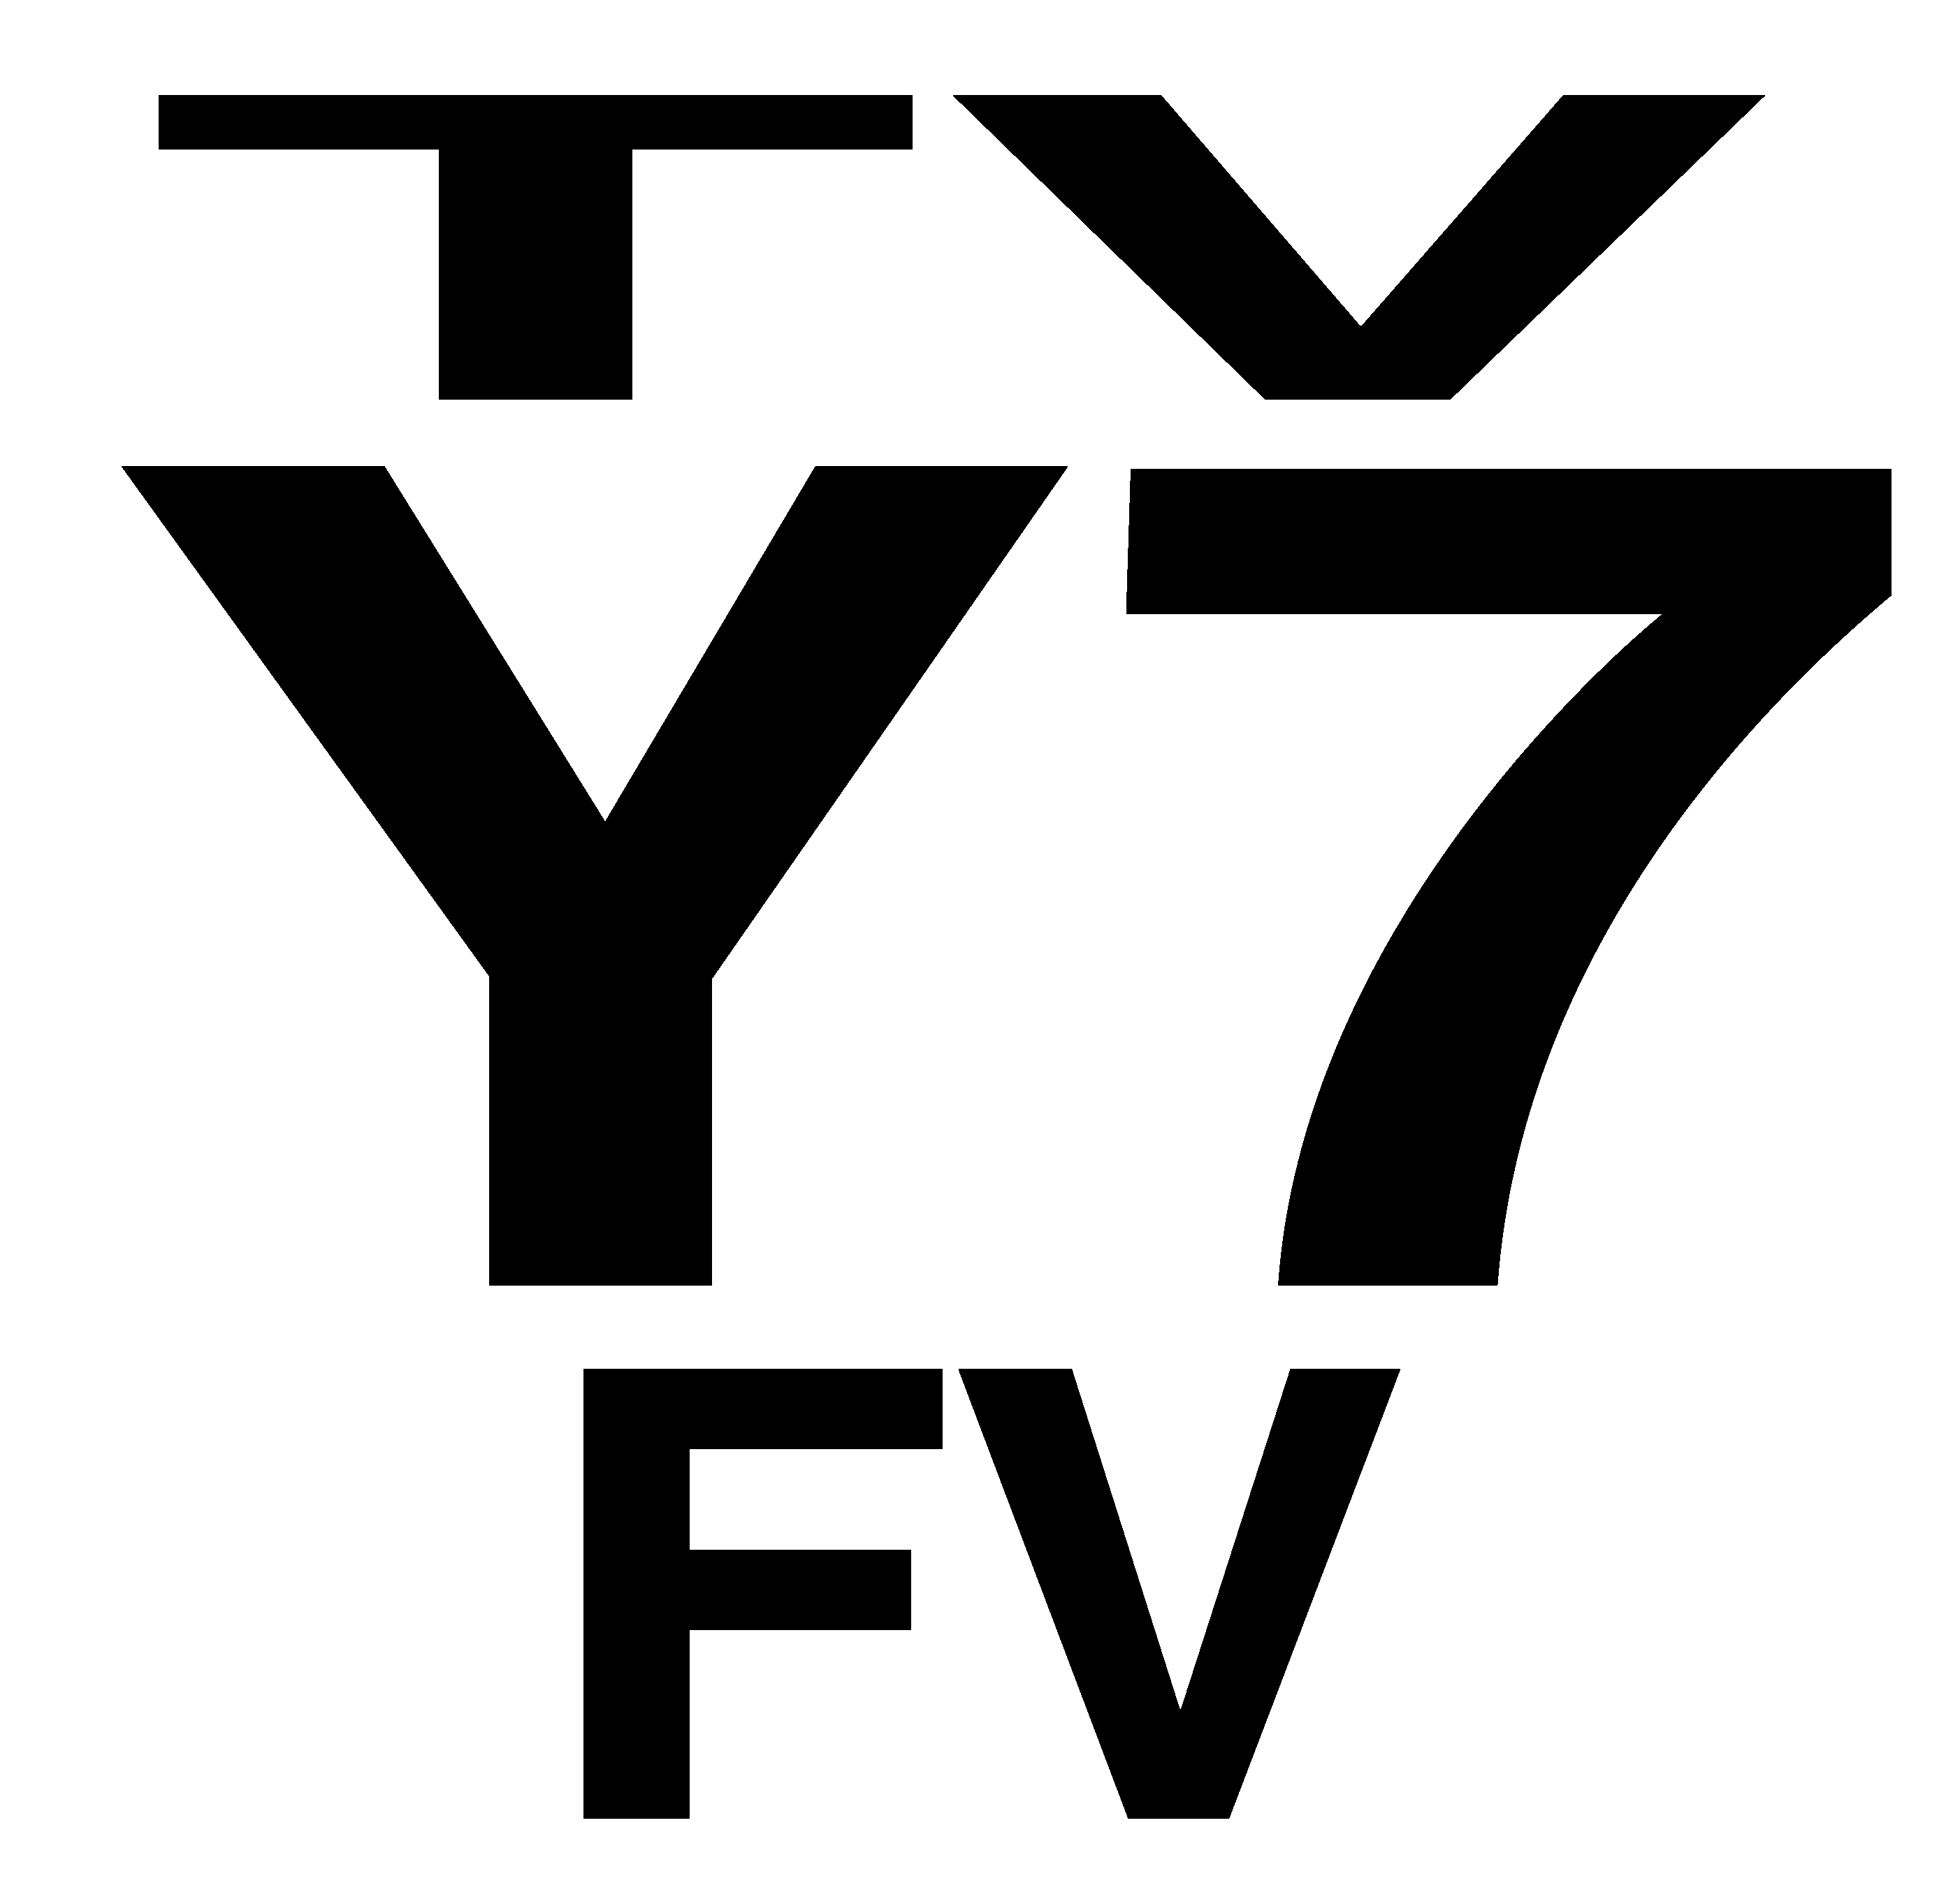 TV-Y7 Logo - File:White TV-Y7-FV icon.png - Wikimedia Commons